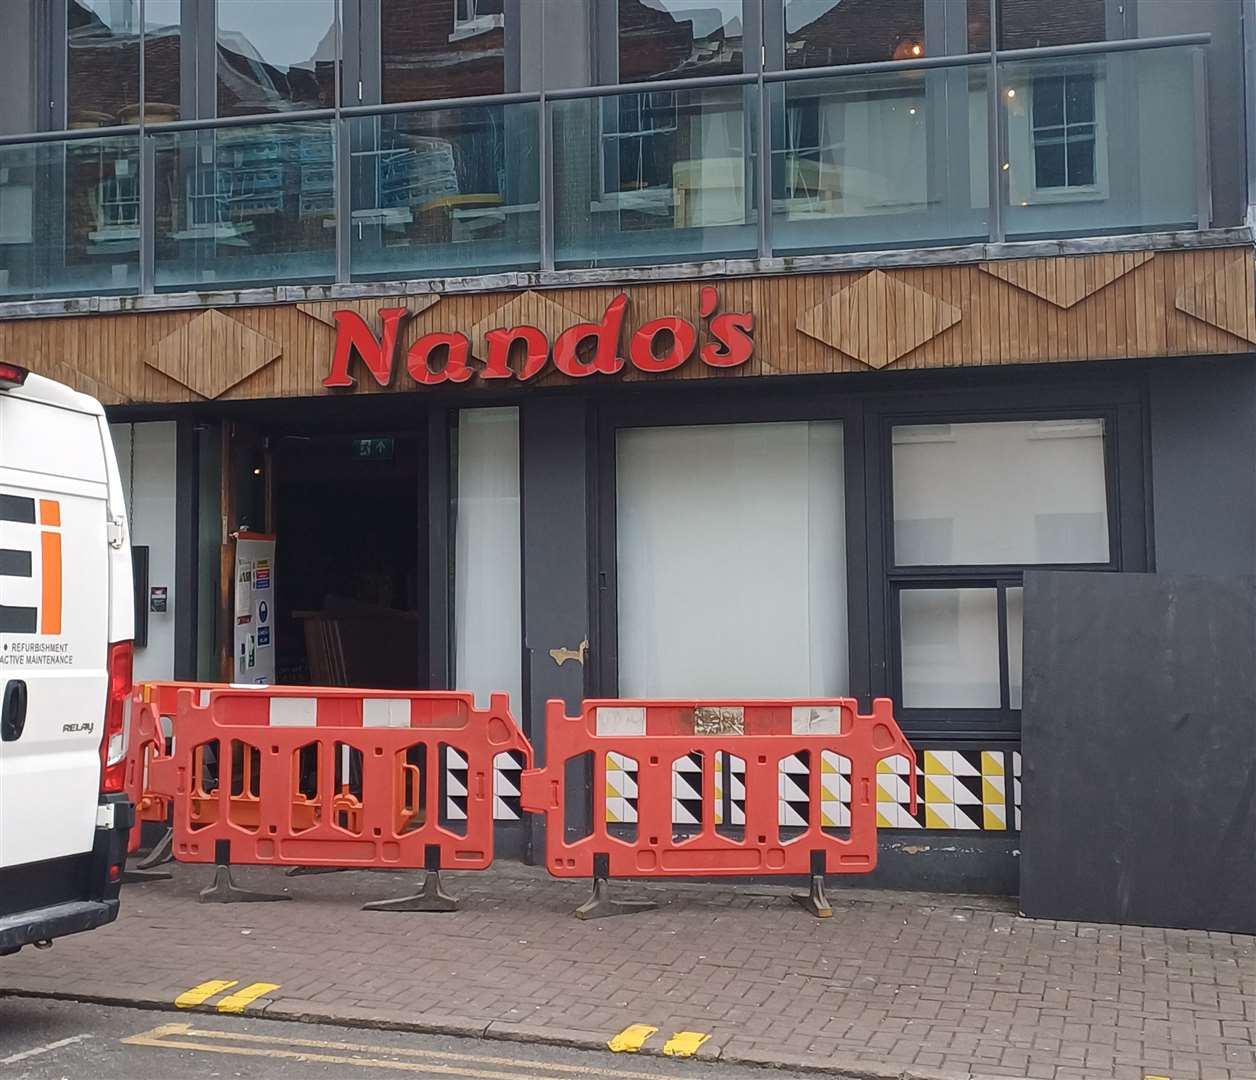 Nando's in Earl Street, Maidstone, is currently closed for renovations